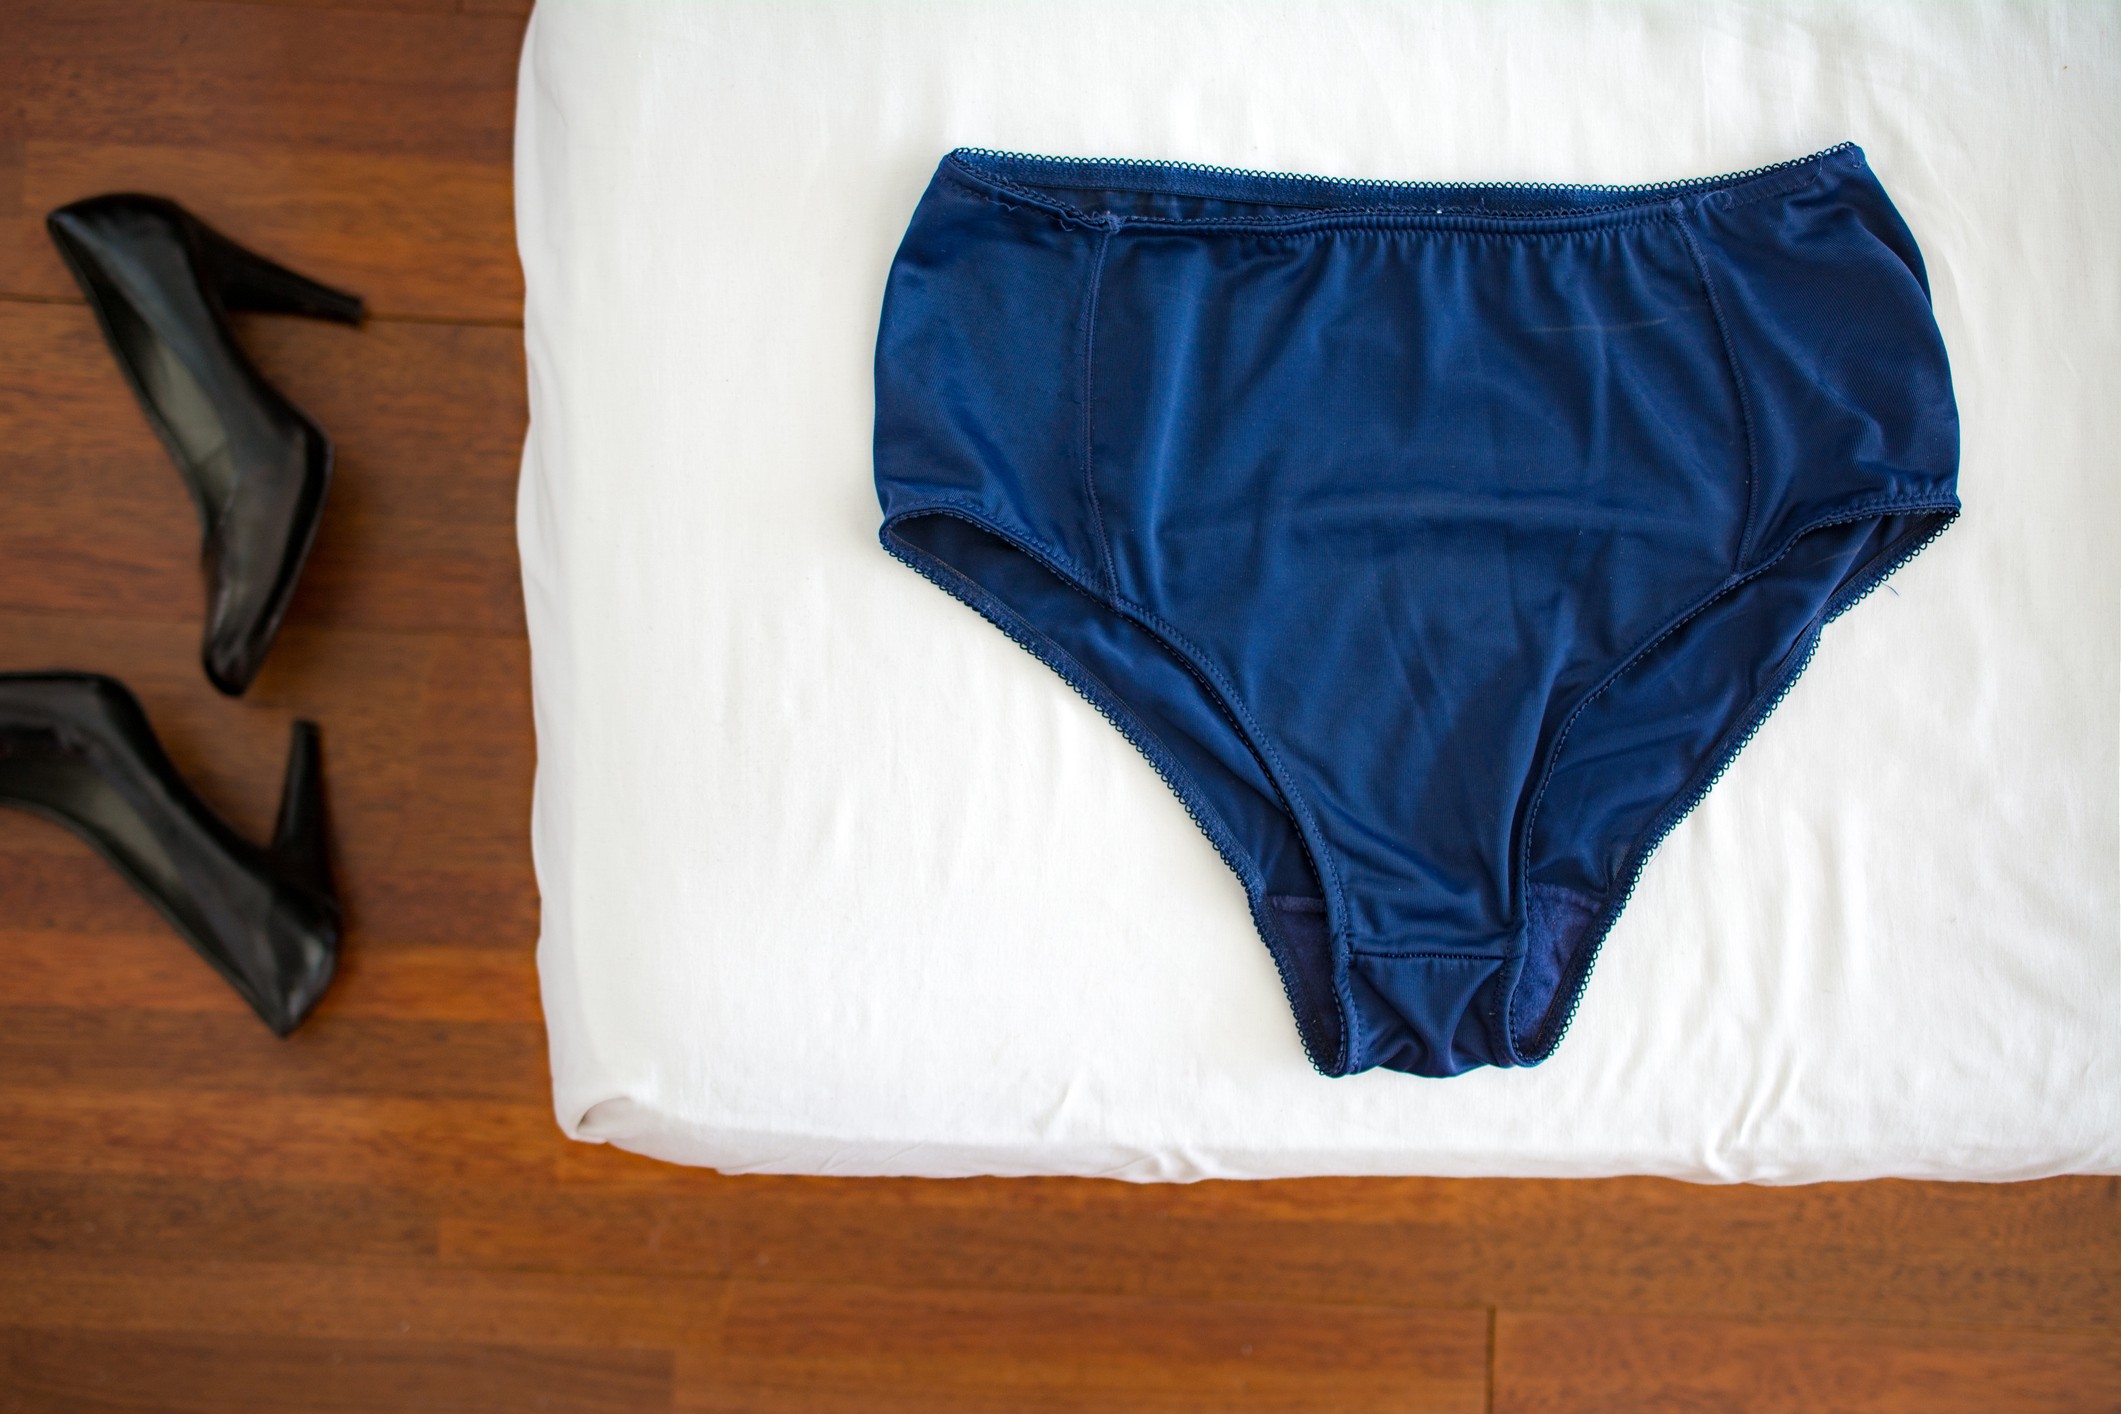 What Are the Benefits of Wearing Underwear?